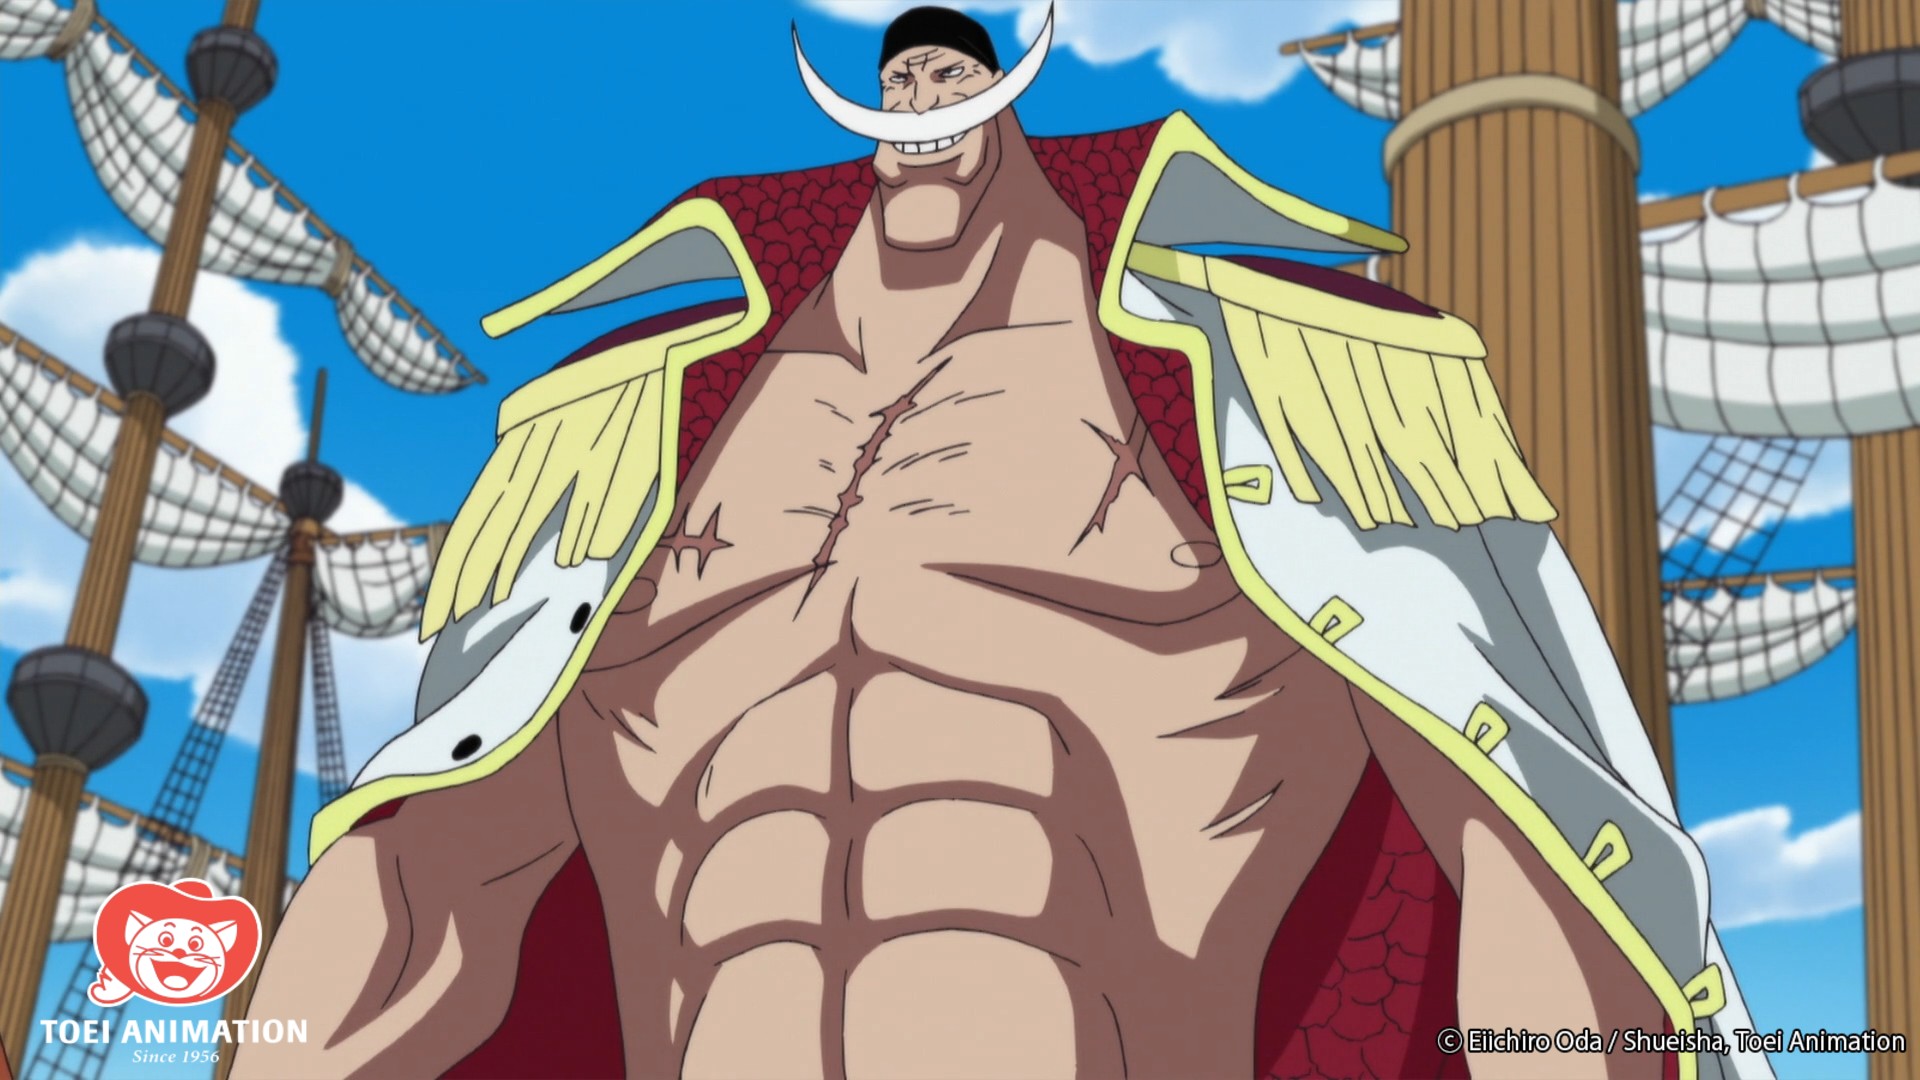 Whitebeard confronts the Navy at the Battle of Marineford in a scene from the One Piece TV anime.